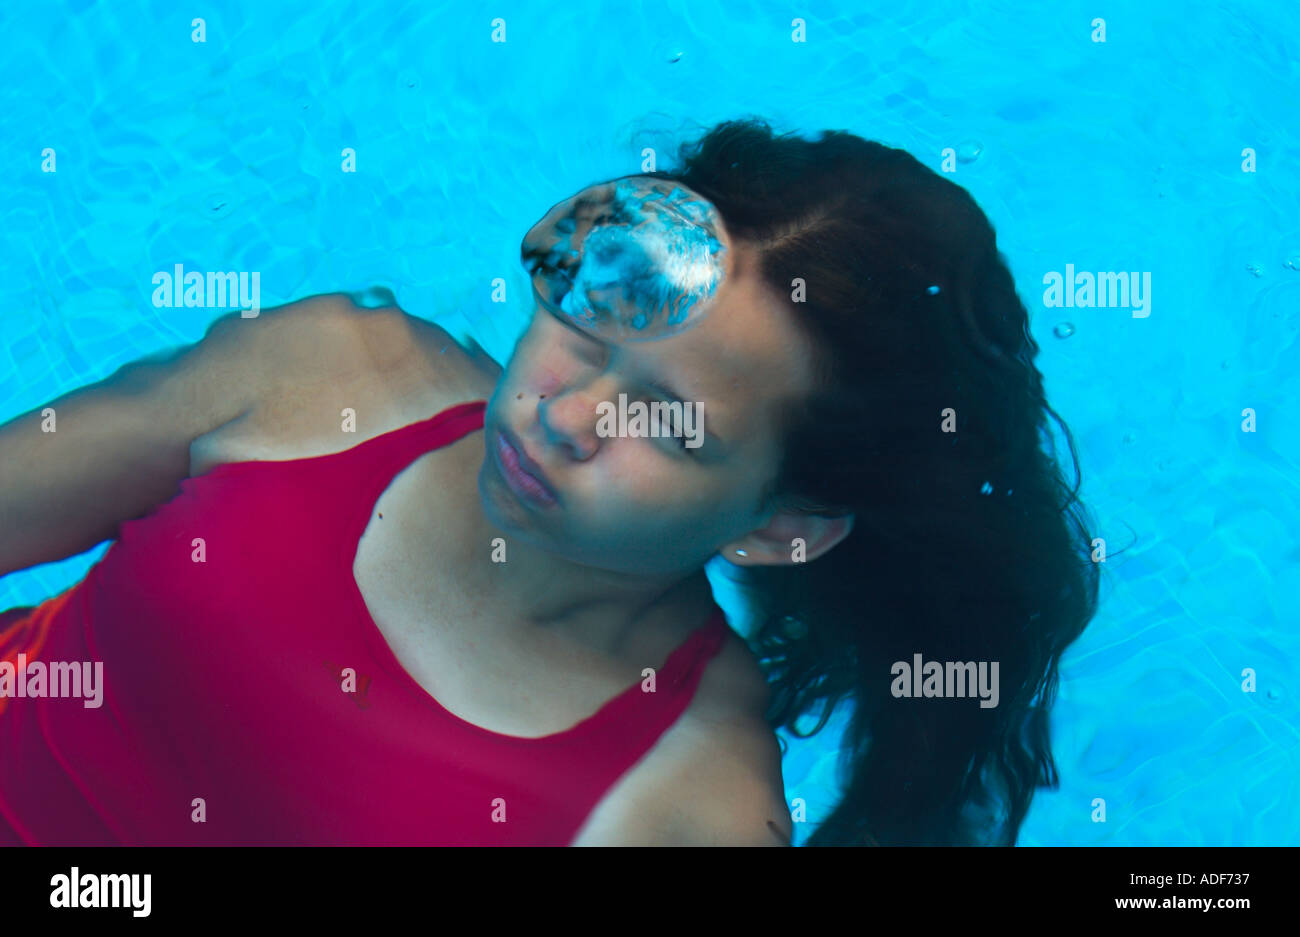 Teenage Girl Wearing Red Bathing Suit Floats In Swimming Pool Just Below The Water Surface And